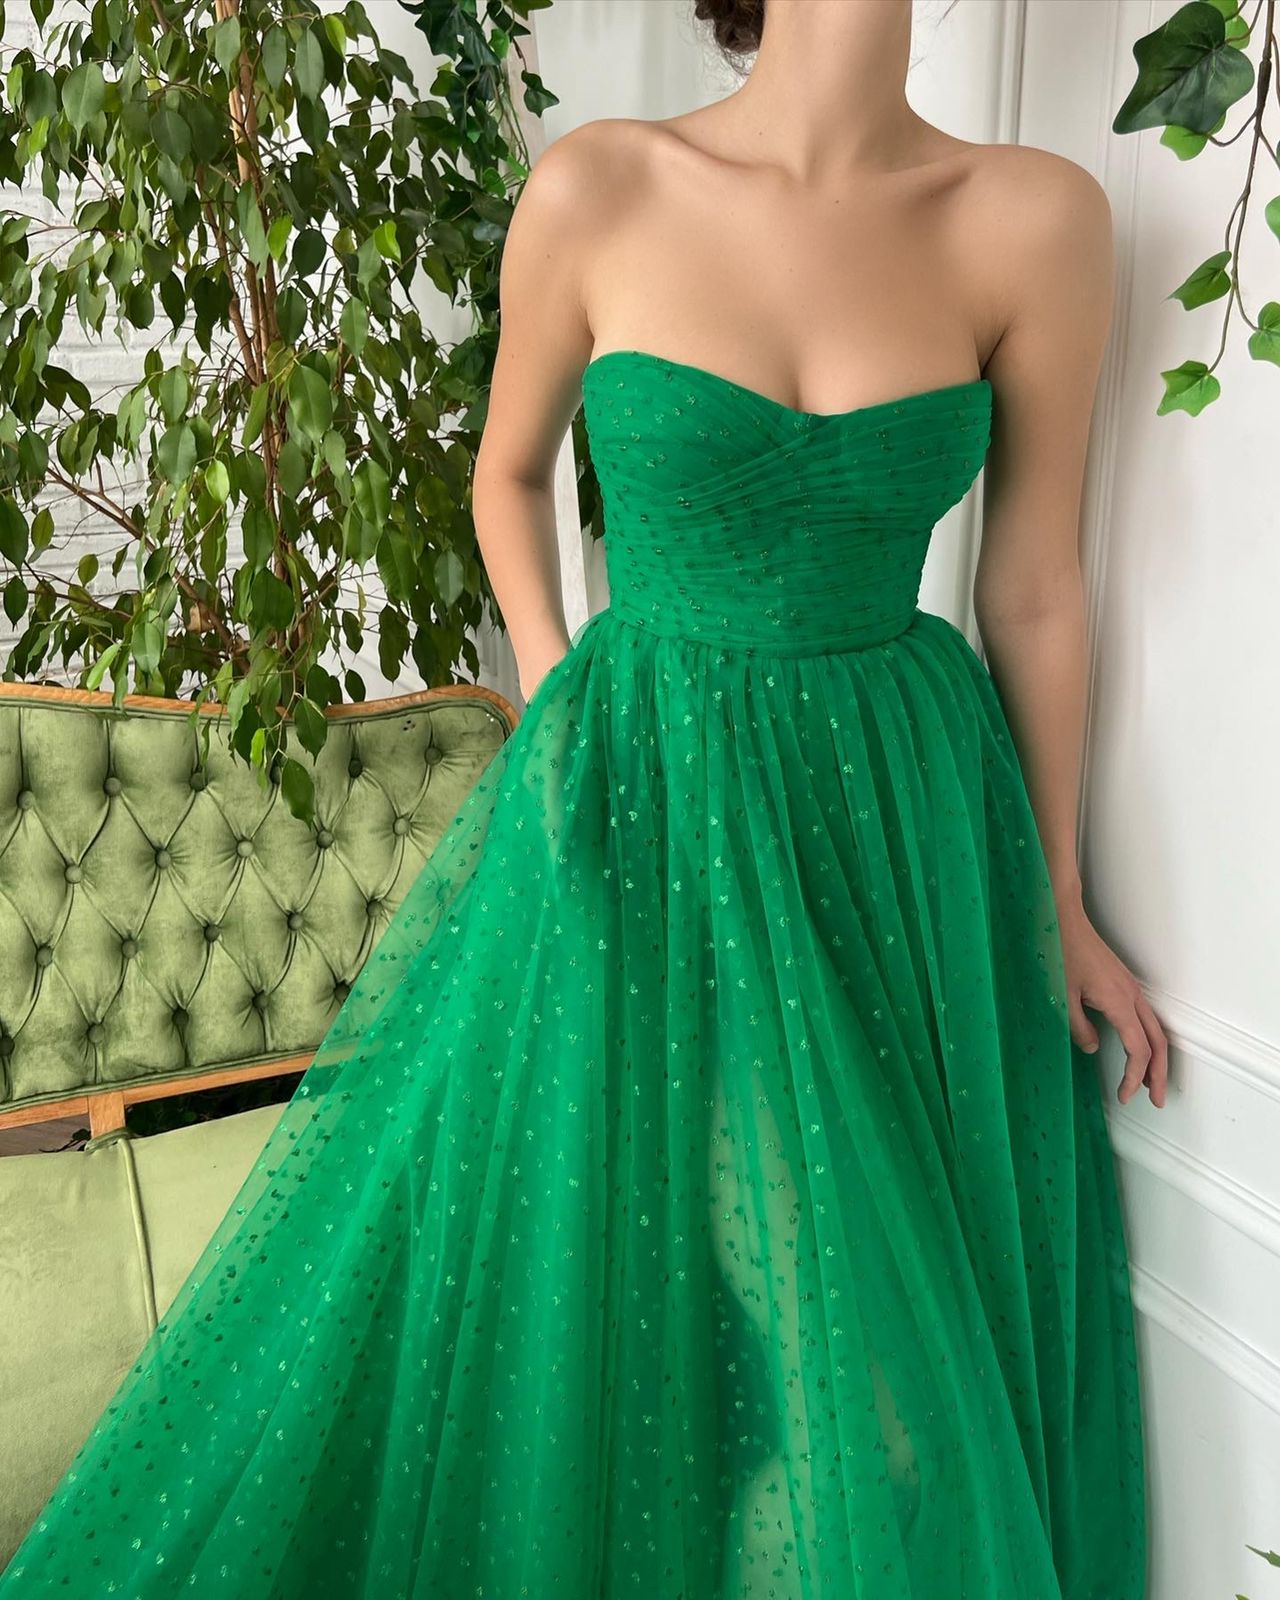 Green midi dress with no sleeves and hearty fabric